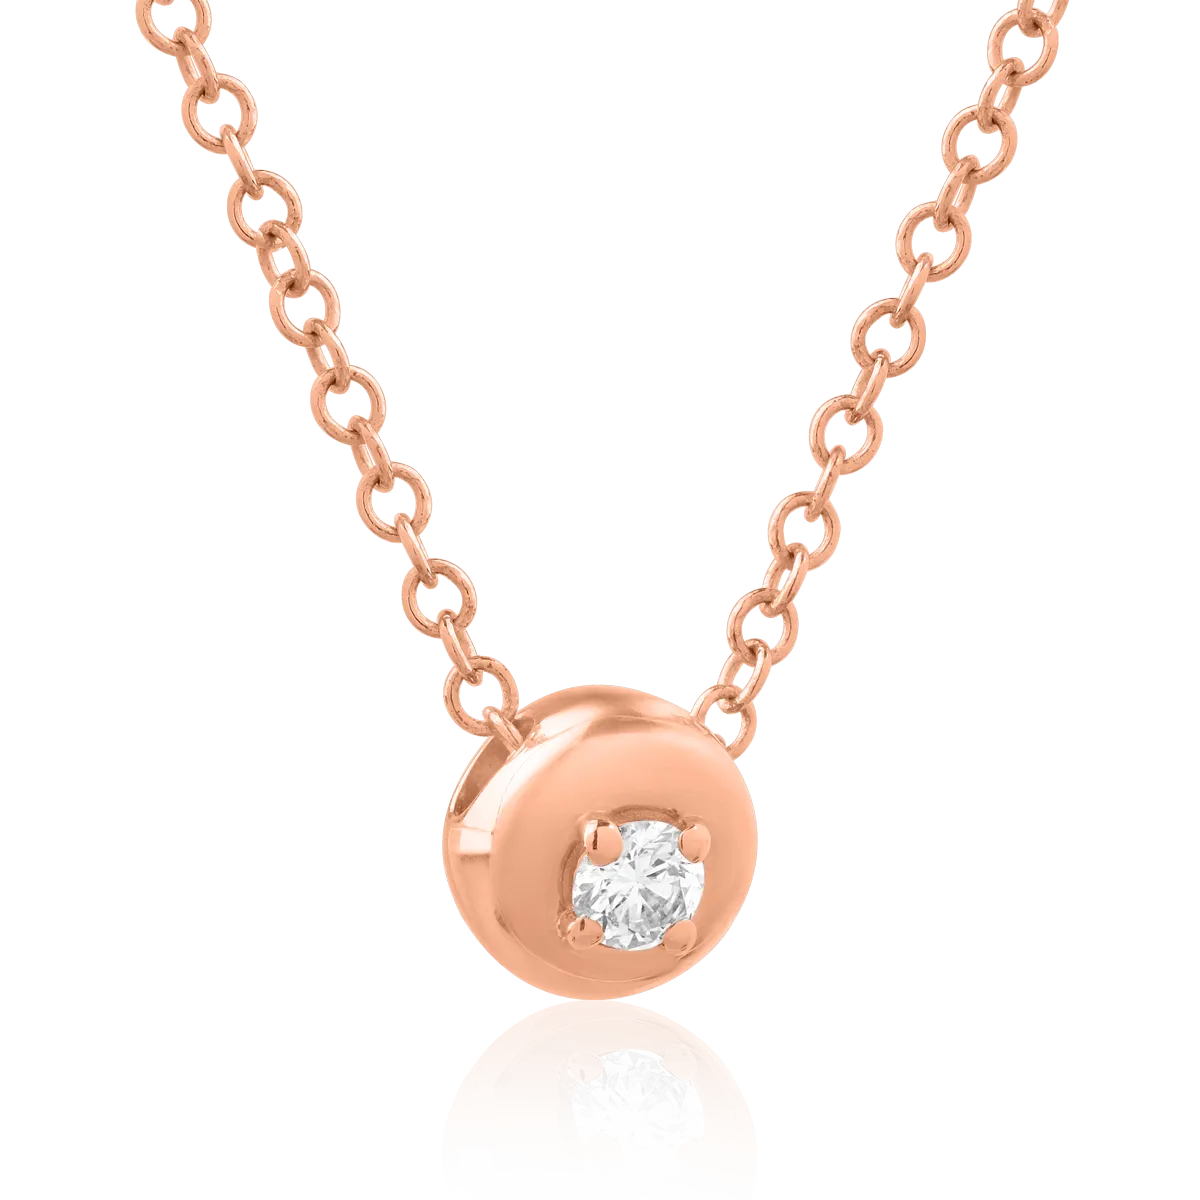 14K rose gold pendant necklace with 0.042ct diamond